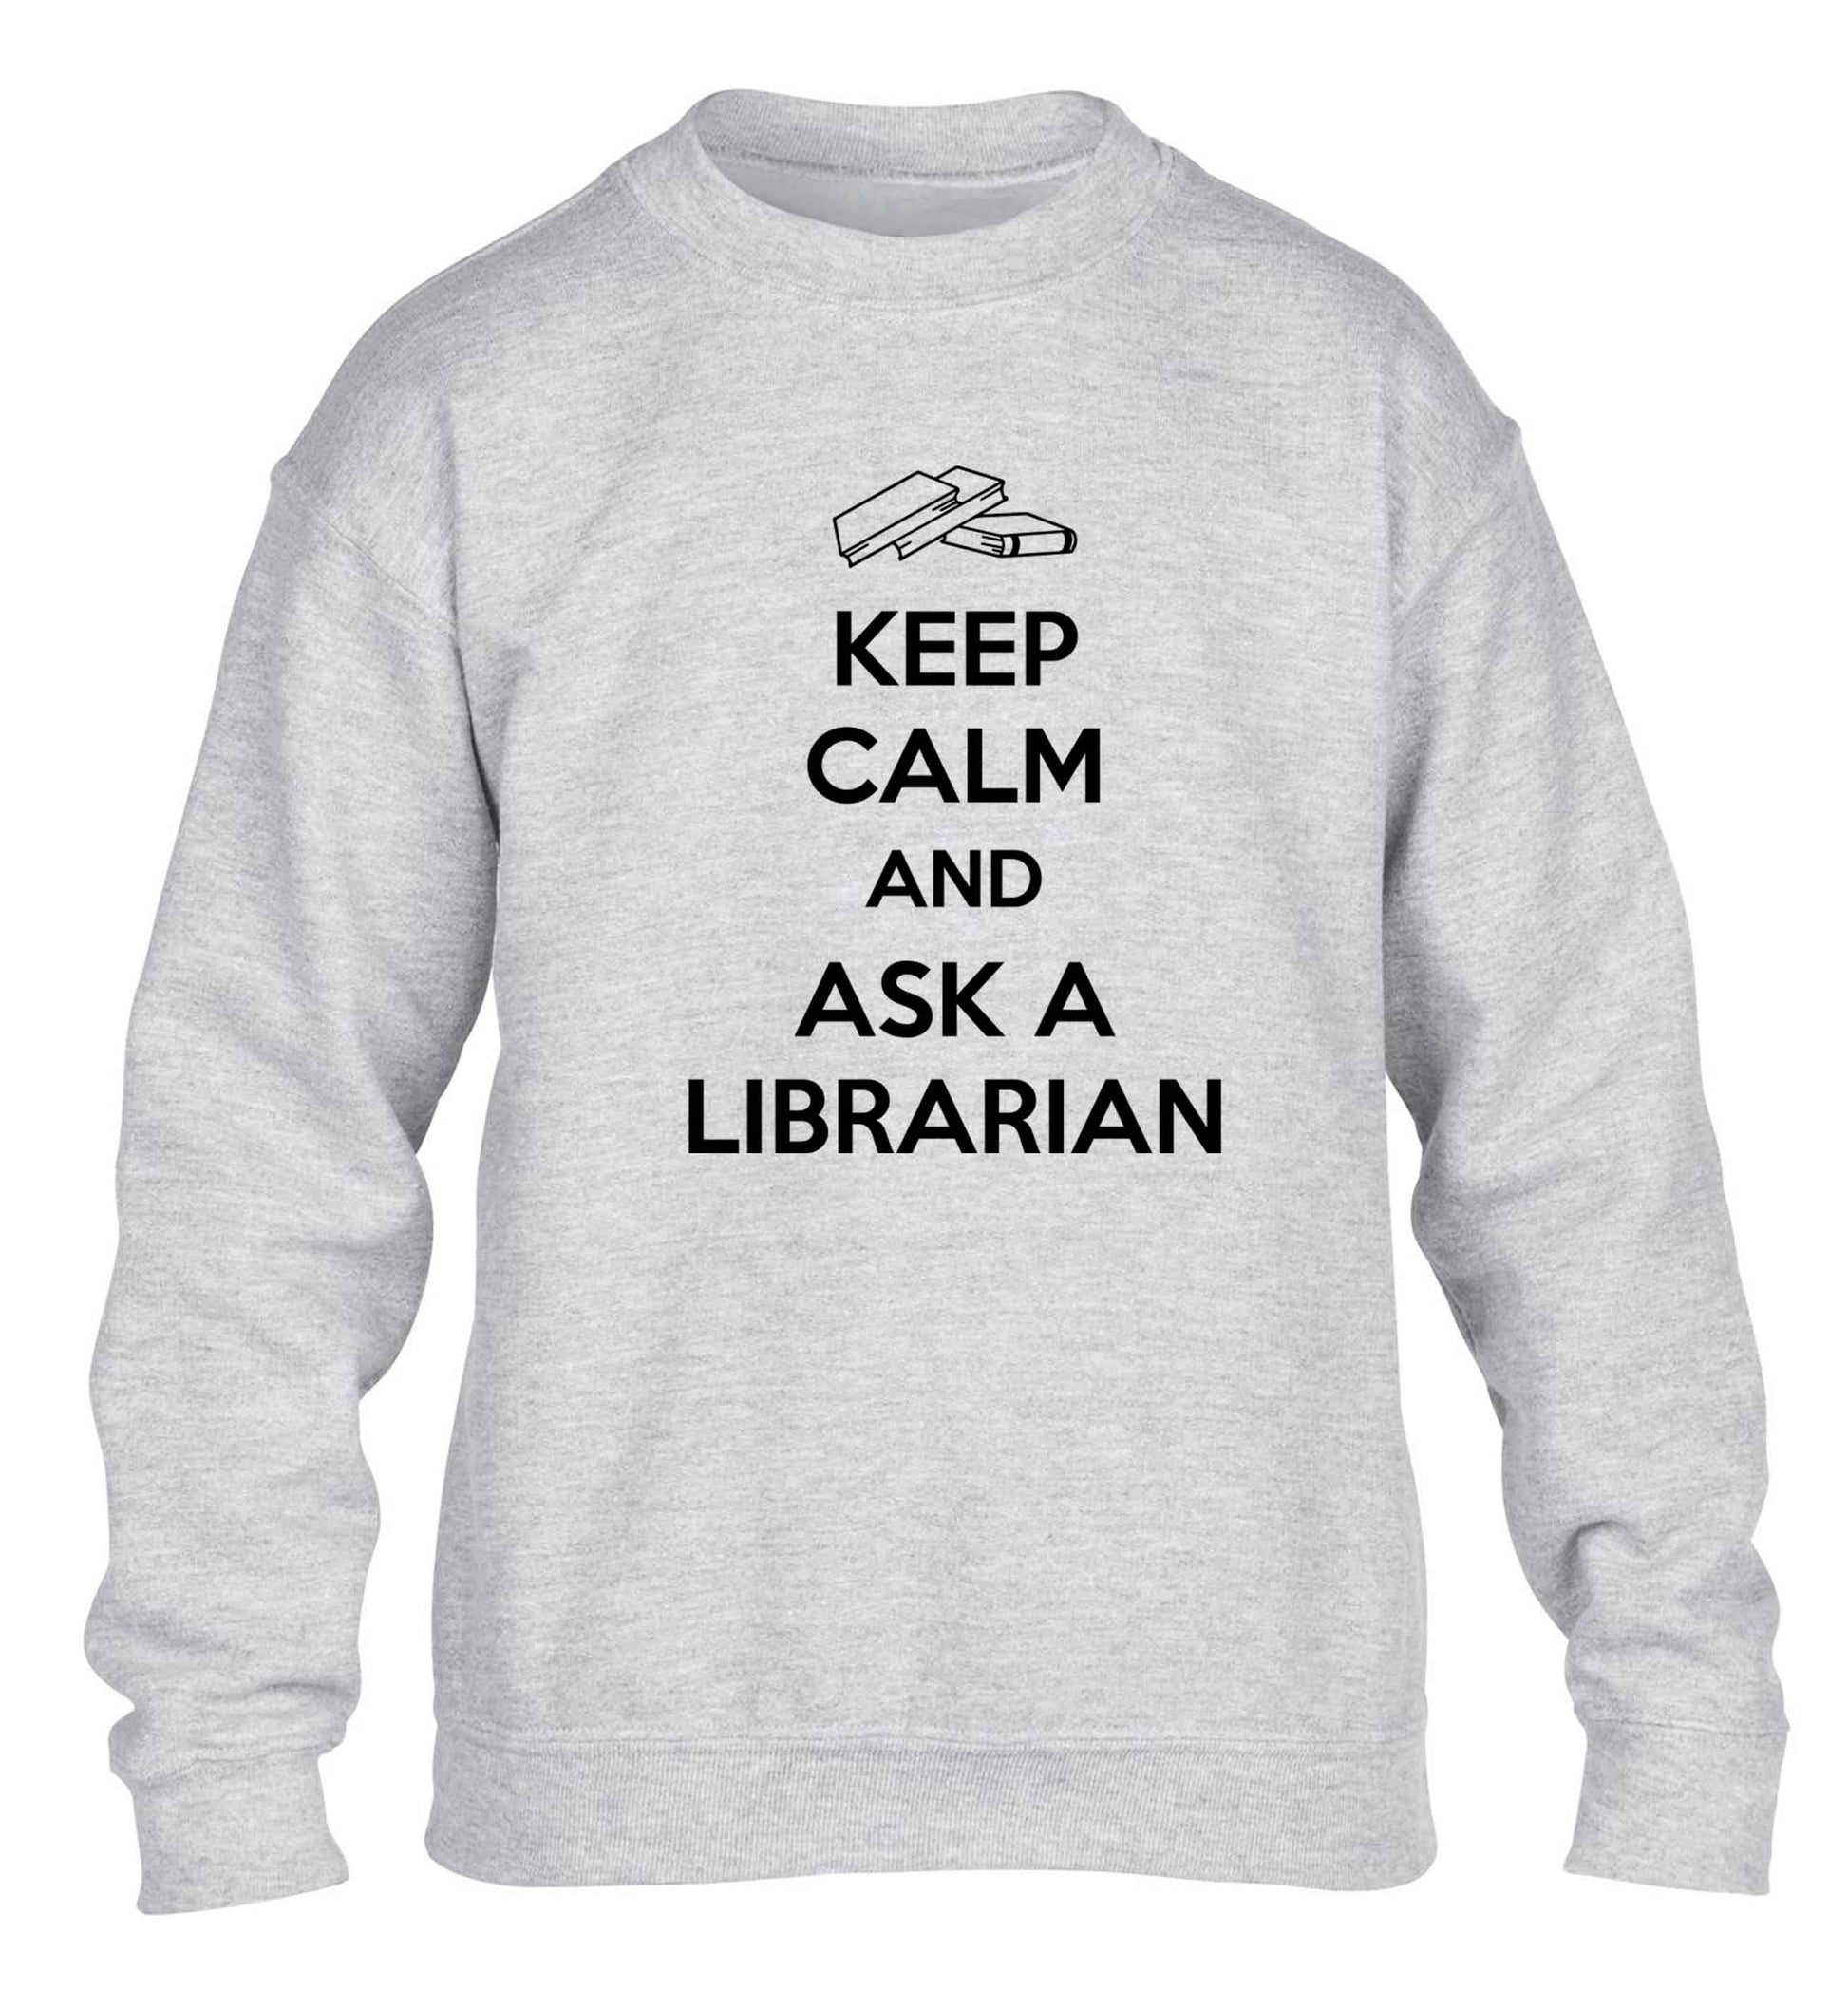 Keep calm and ask a librarian children's grey sweater 12-13 Years